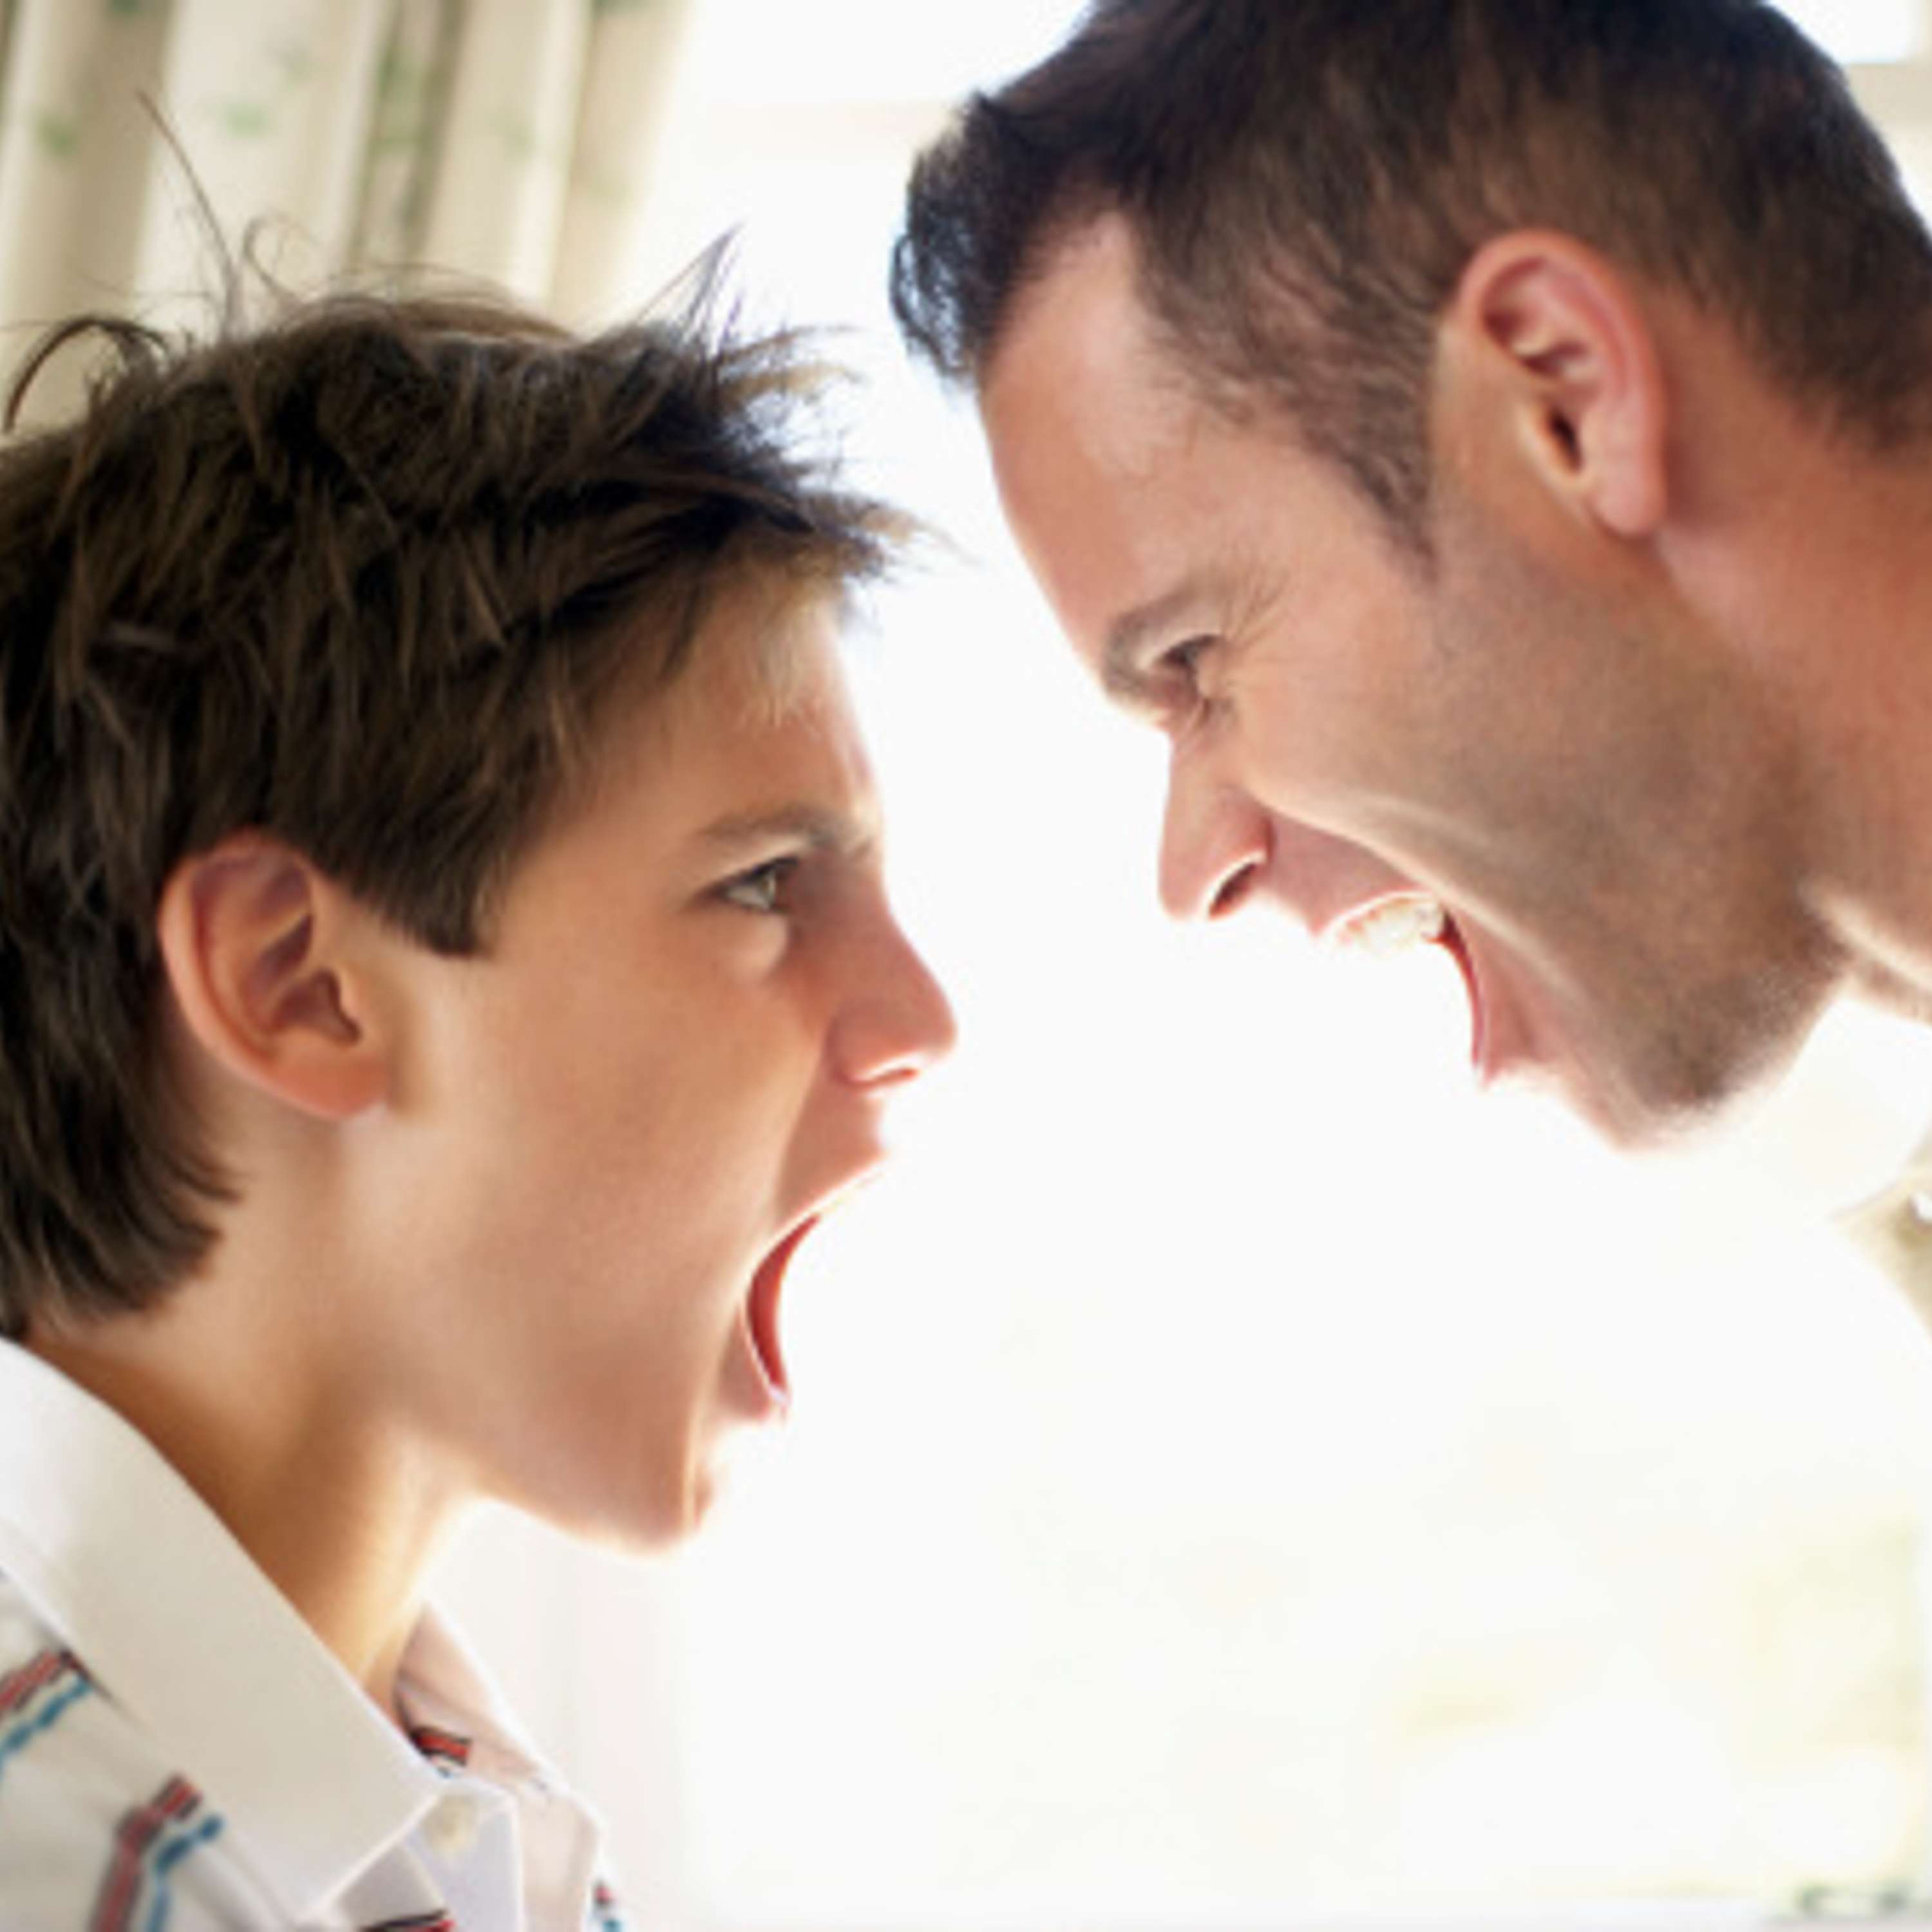 When We Want to Be Treated Unfairly: The Story of the Fathers’ Unacceptable Behavior